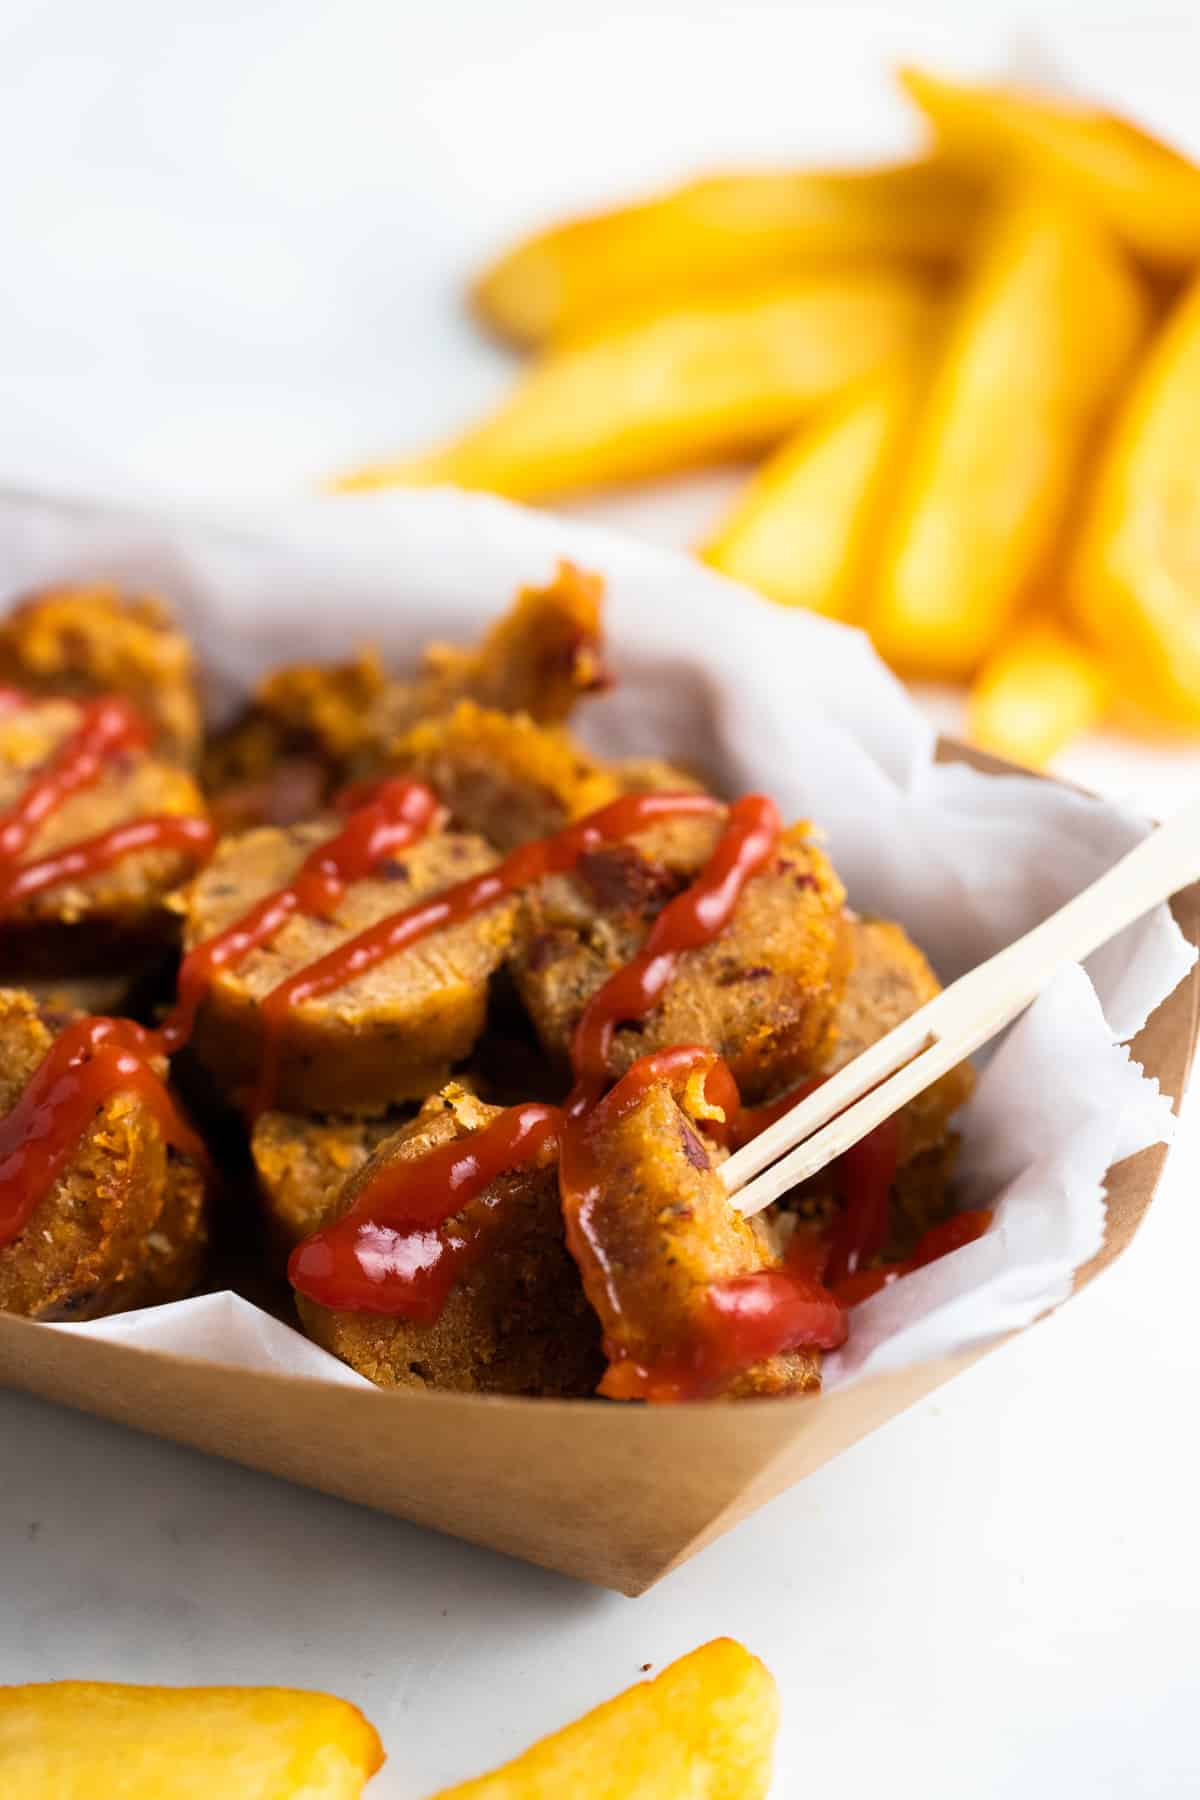 a sliced vegan sausage on a paper plate with fries in the background